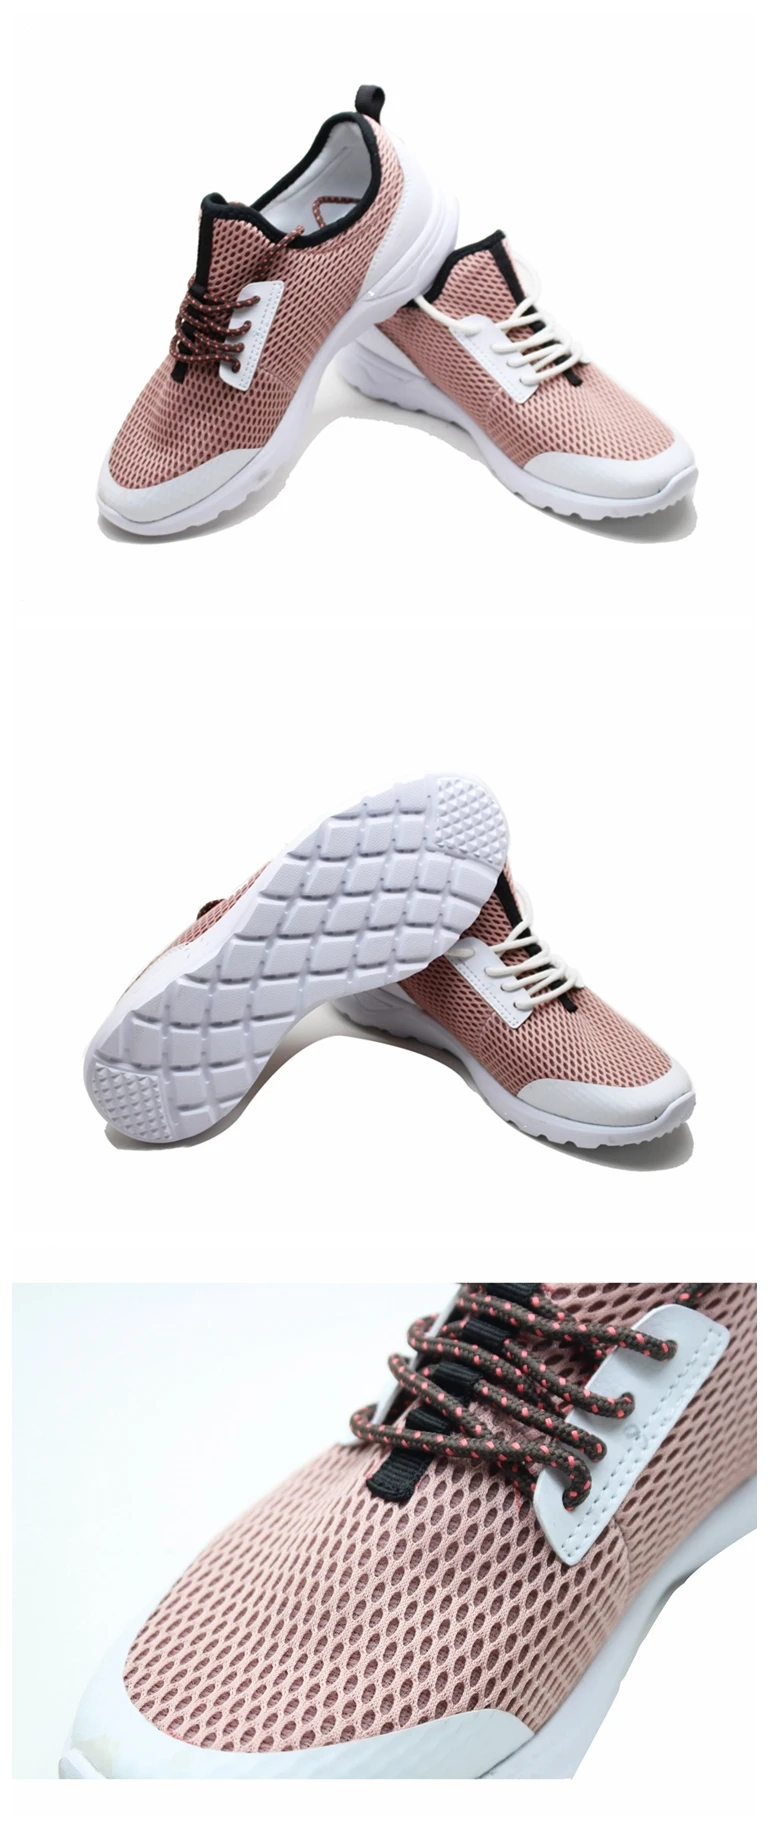 Adult Walk On Water Shoes Running Shoes Light Breathable